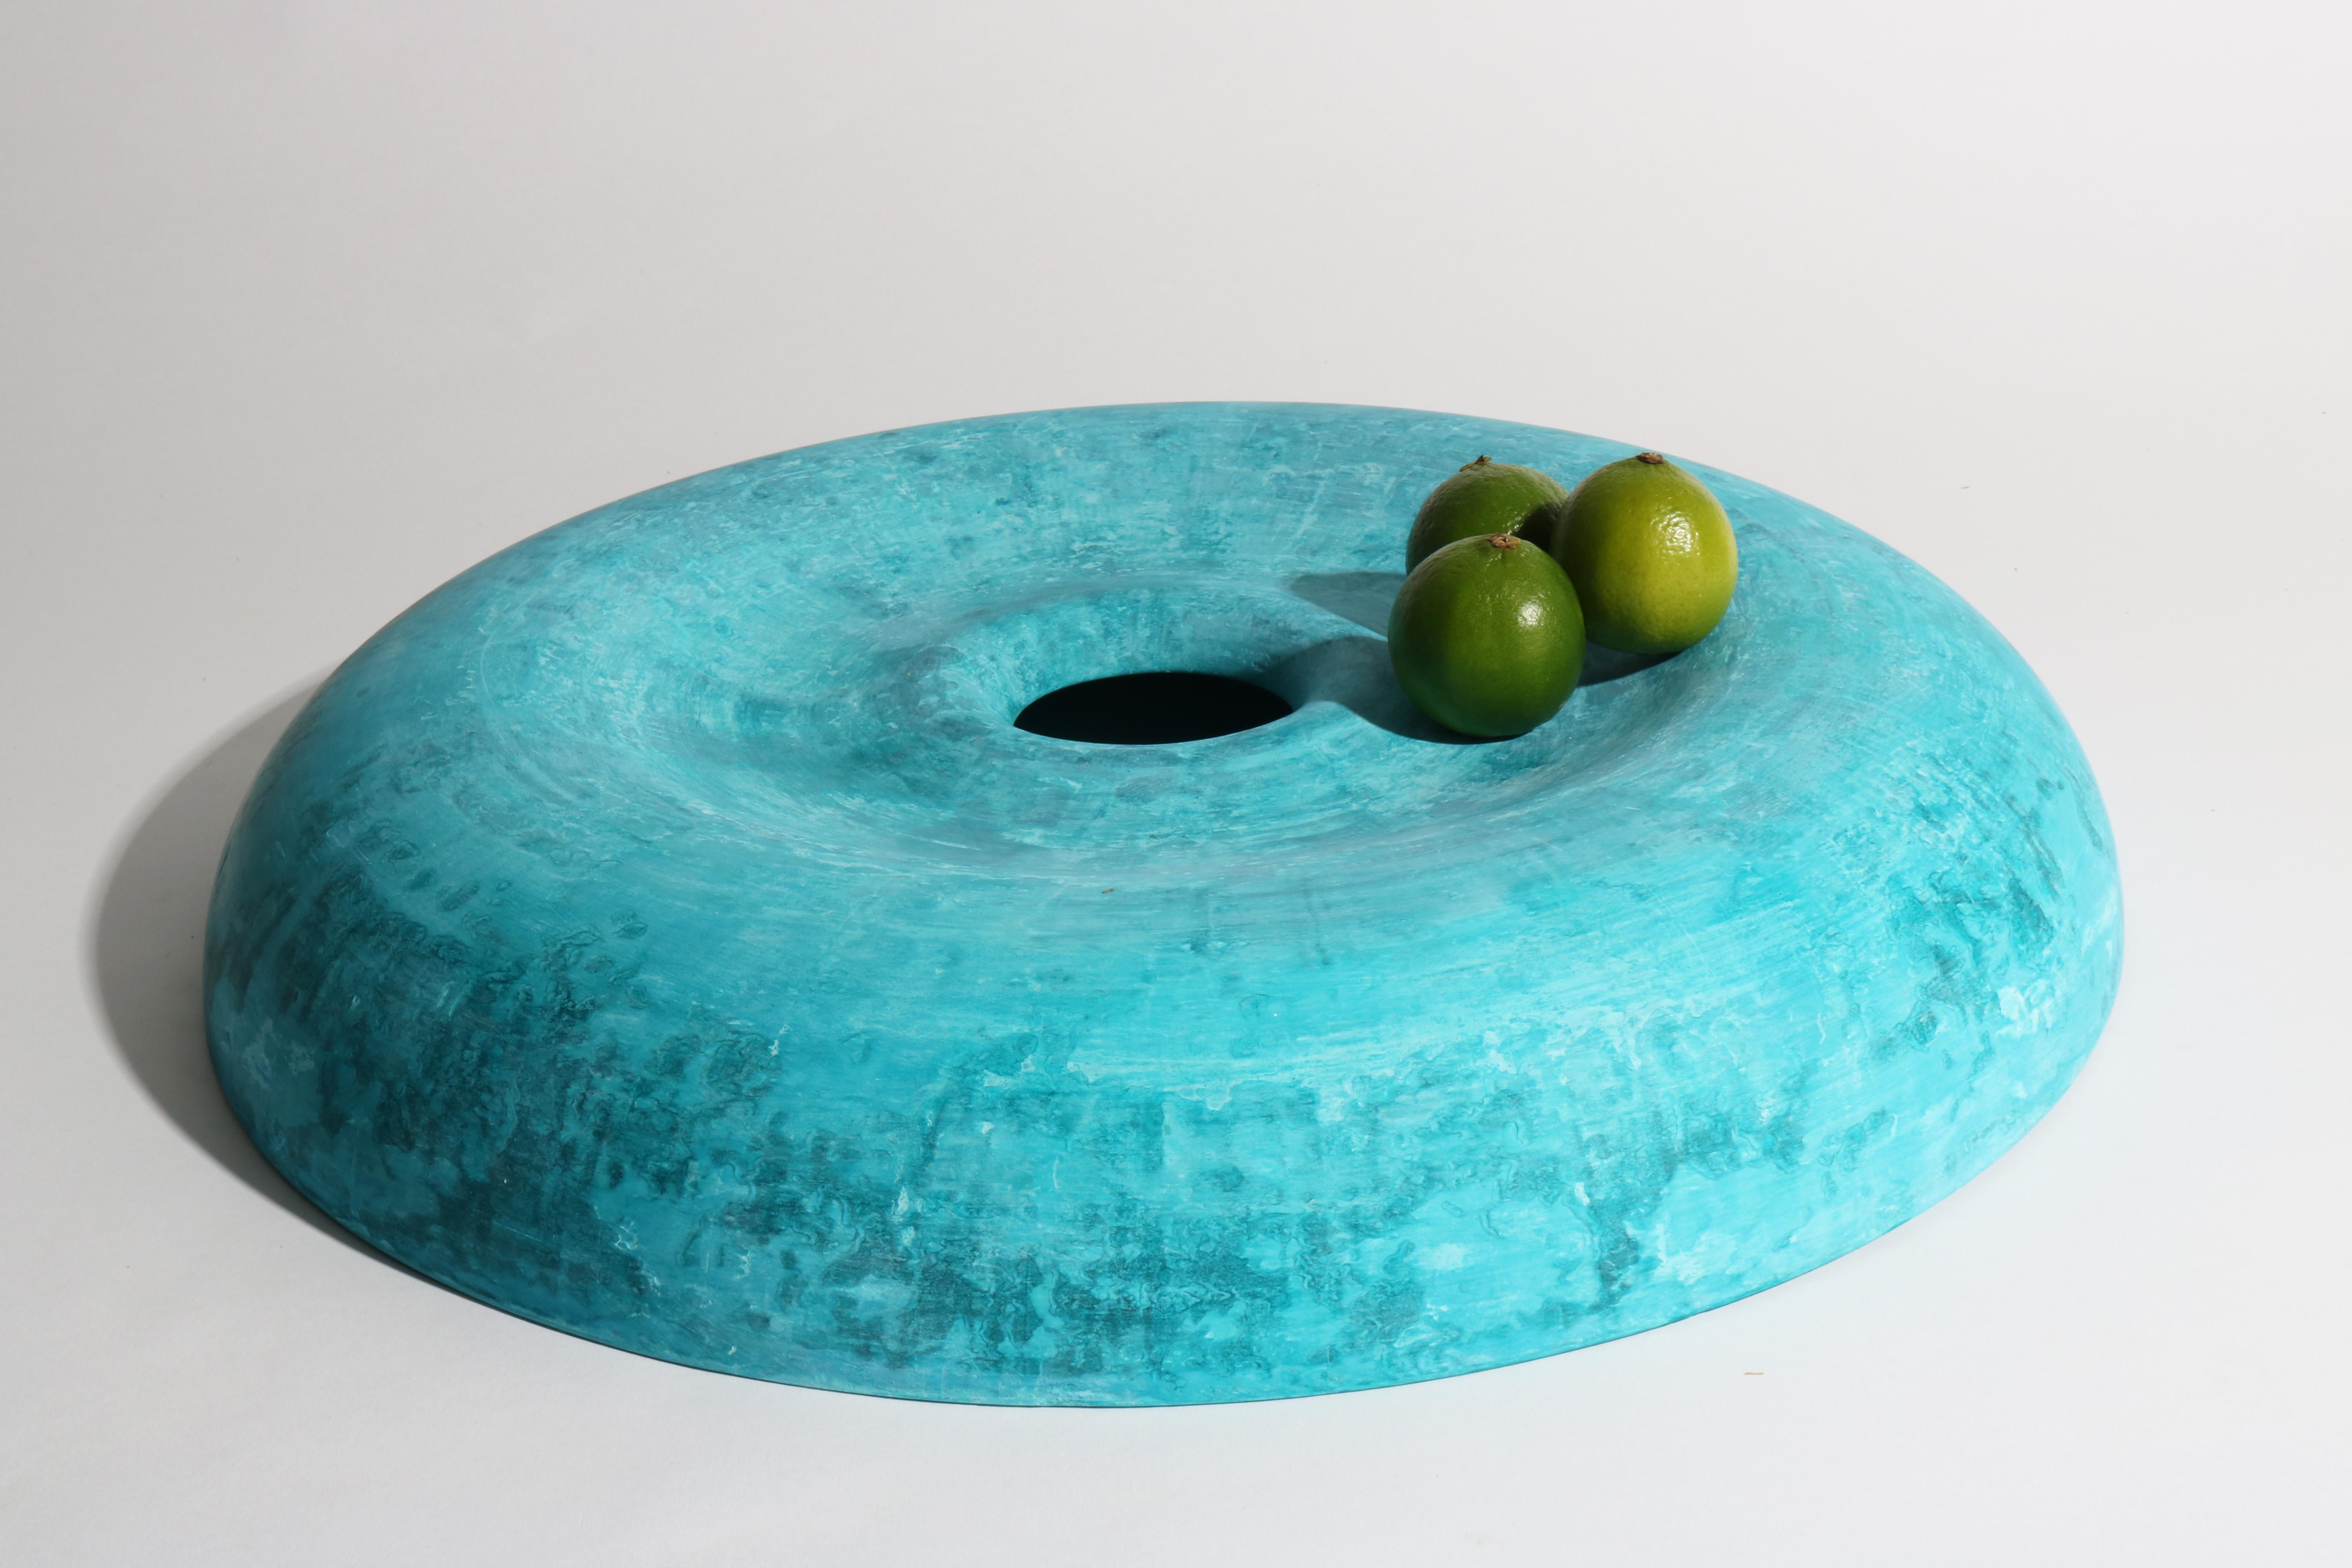 Twirl Bowl, Ocean Blue

Production: Made to order, Other designs can be made on request.

Material: Alpha crystalline gypsum (Hard plaster)
Finish: Glossy coating
Inside Finish: Glossy coating

Twirl Bowls is a Collection of sculptural bowls made by